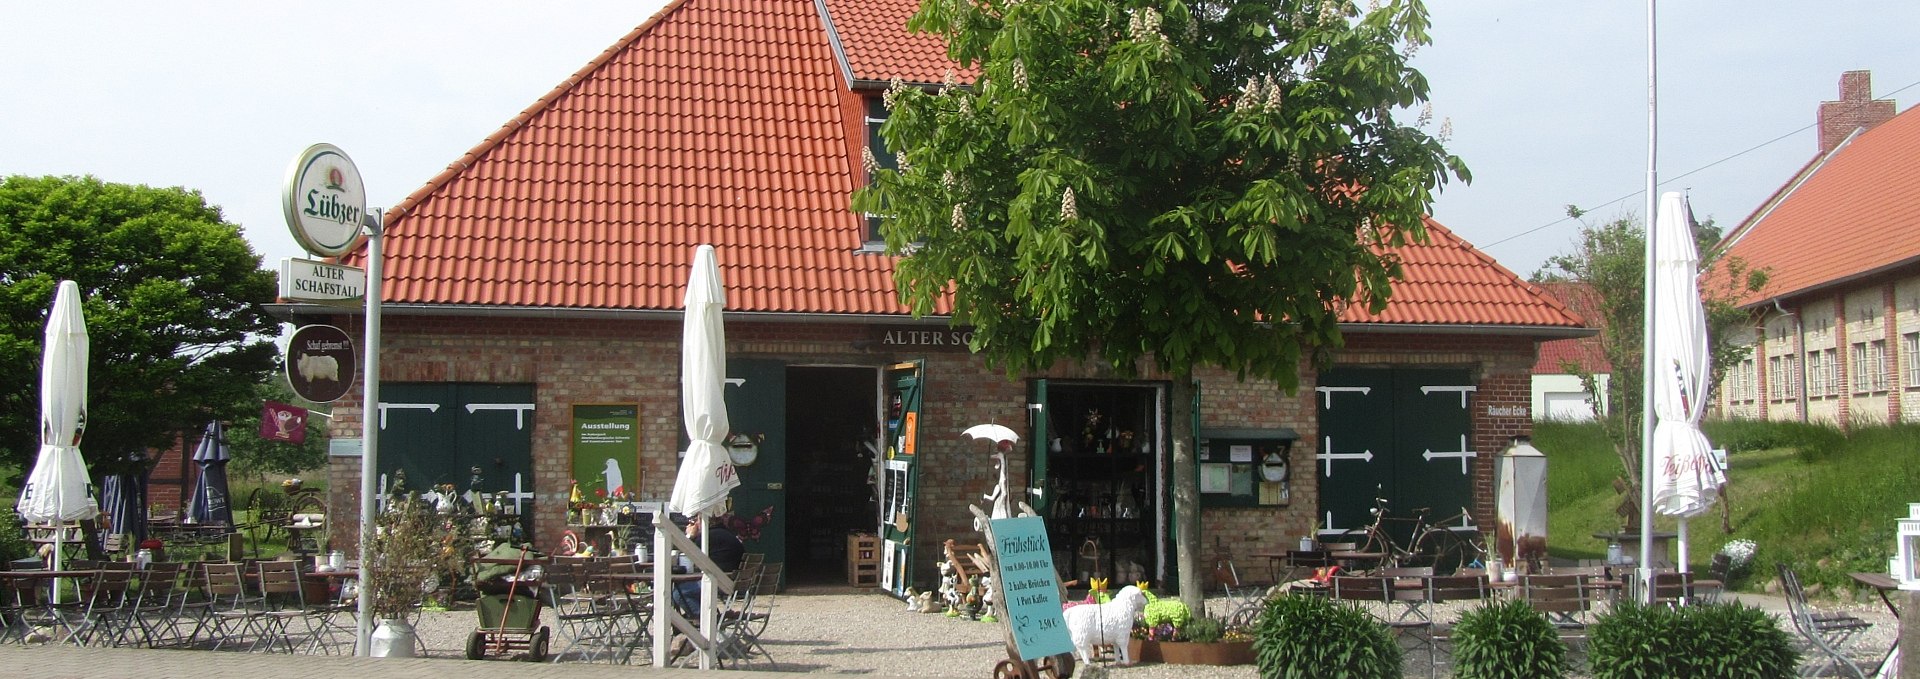 Exterior view of the old sheep barn in Basedow - café with small exhibition, © G. Marin-Ziegler